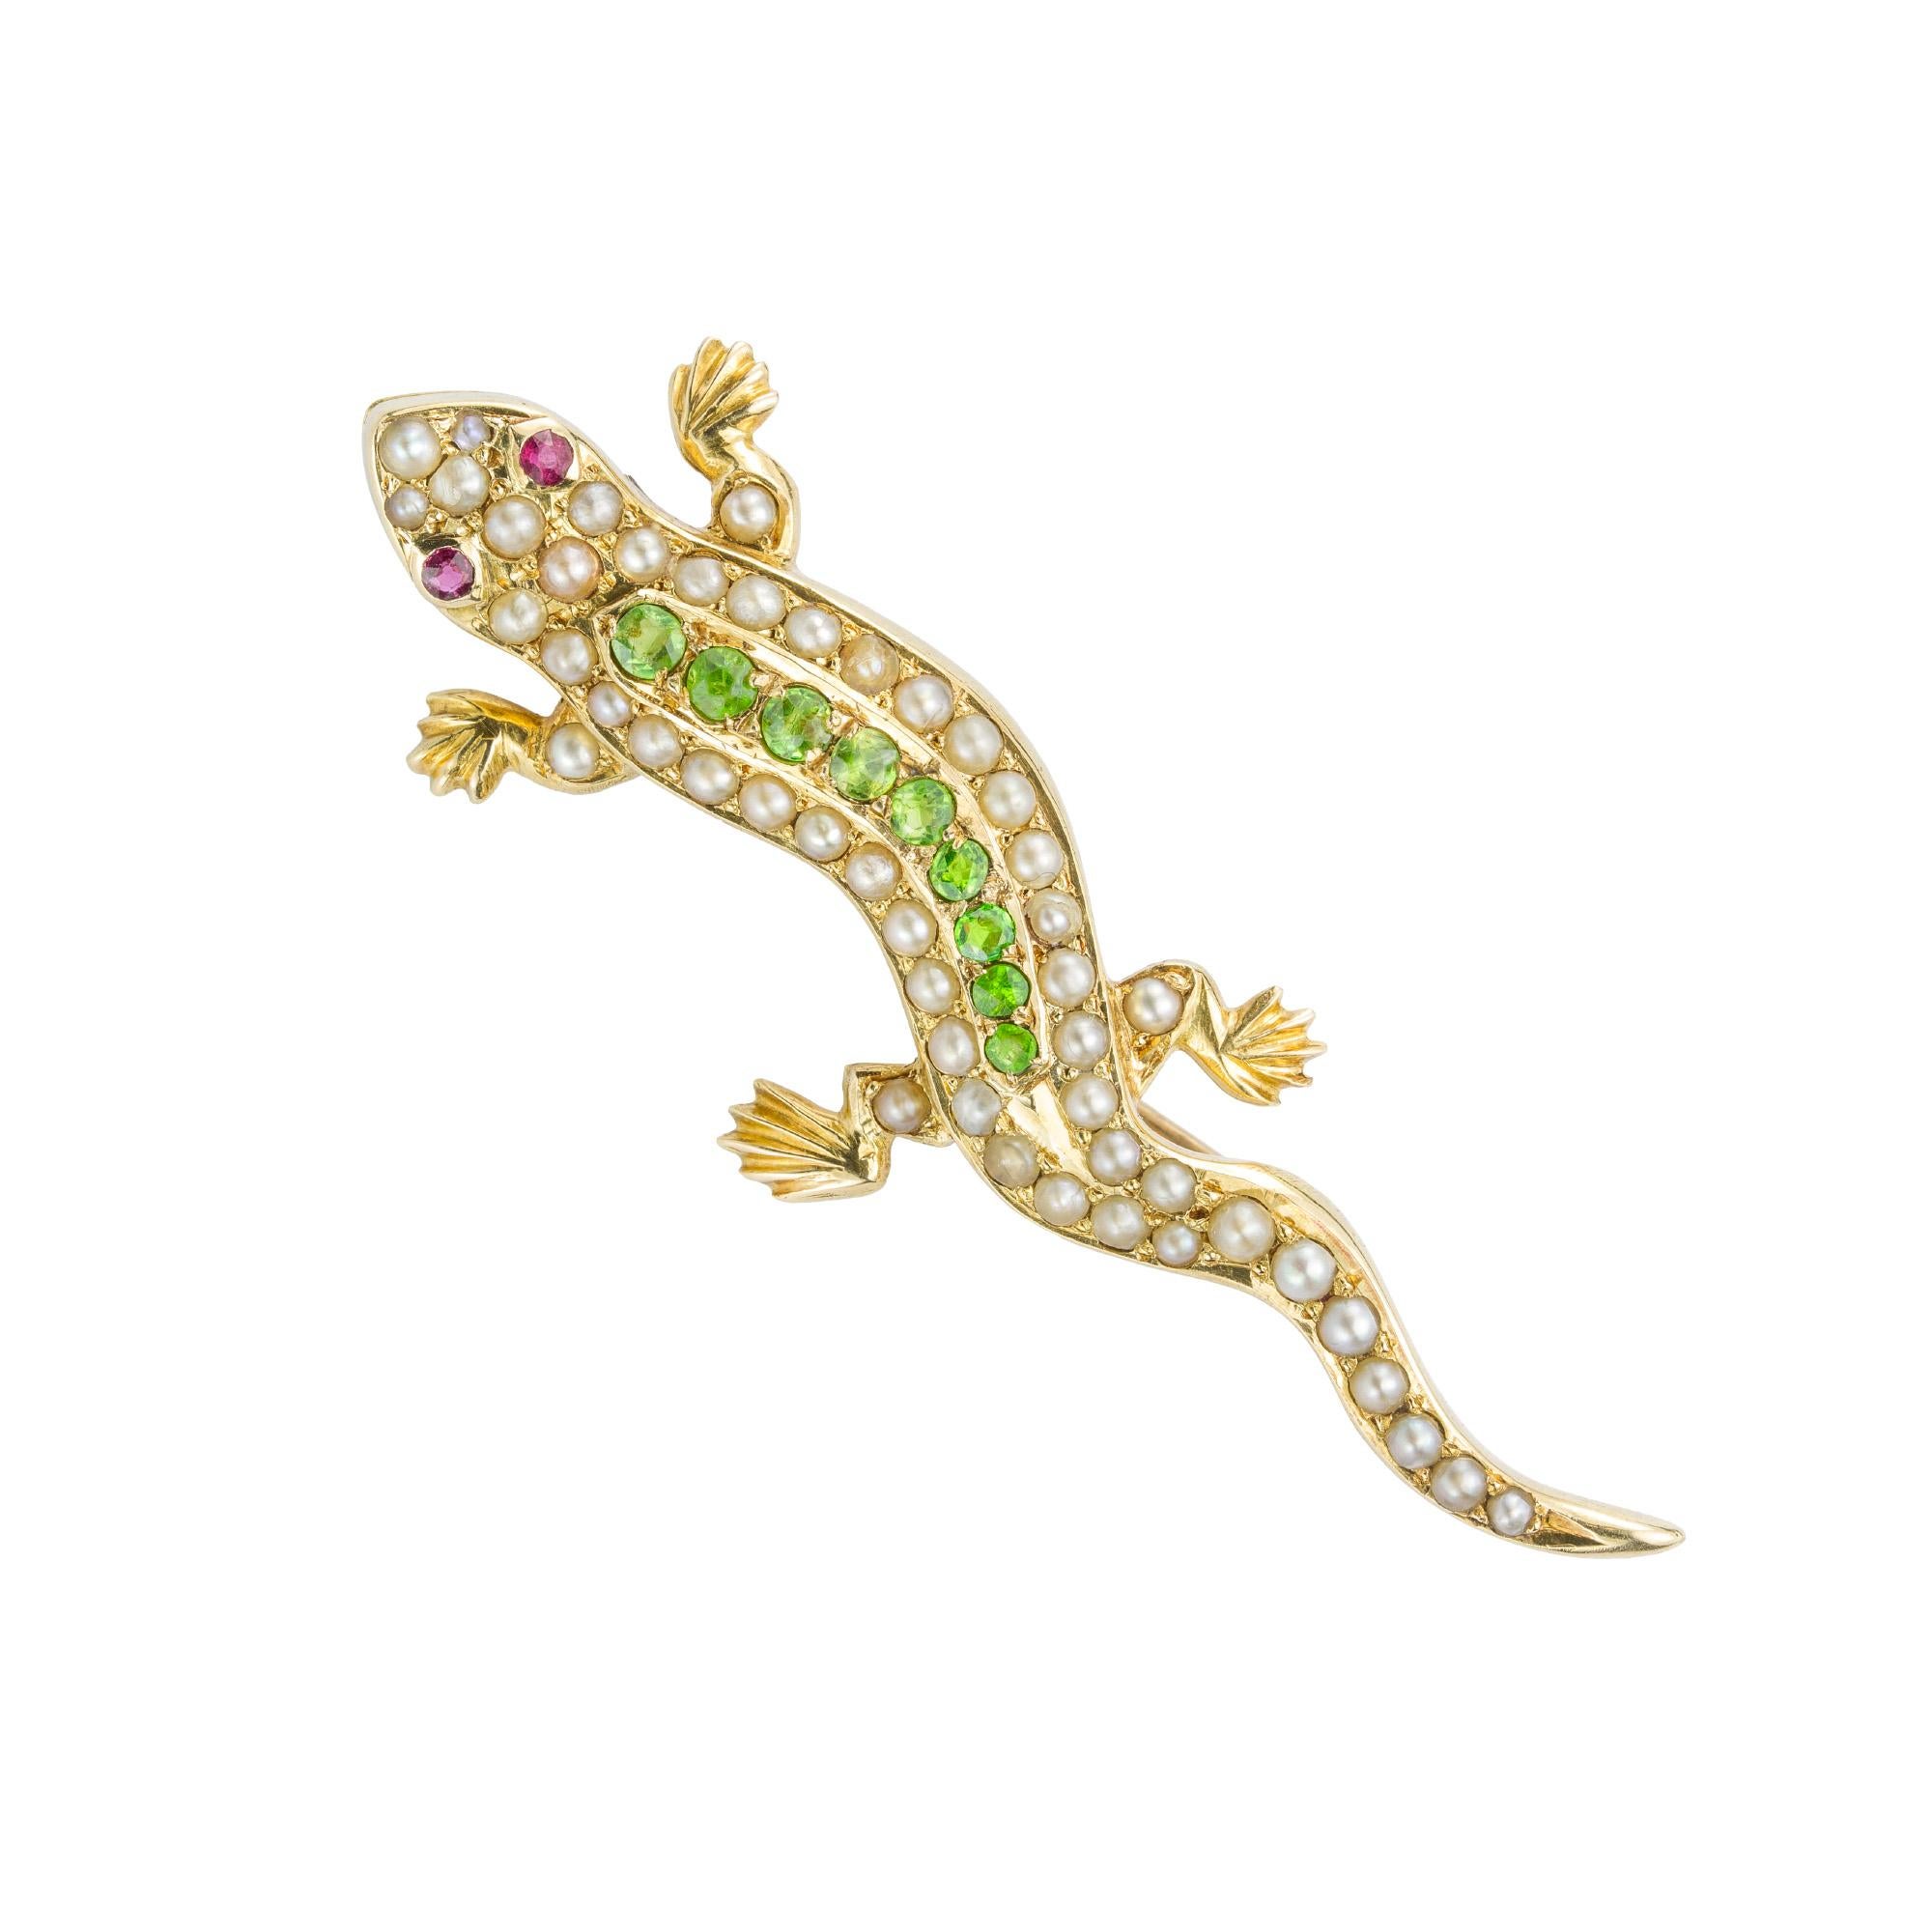 A Victorian demantoid garnet and pearl lizard brooch, the body set with a central row of graduating round faceted demantoid garnets and two half pearl-set rows on the side, with faceted ruby-set eyes and half pearl-set legs, all set in yellow gold,